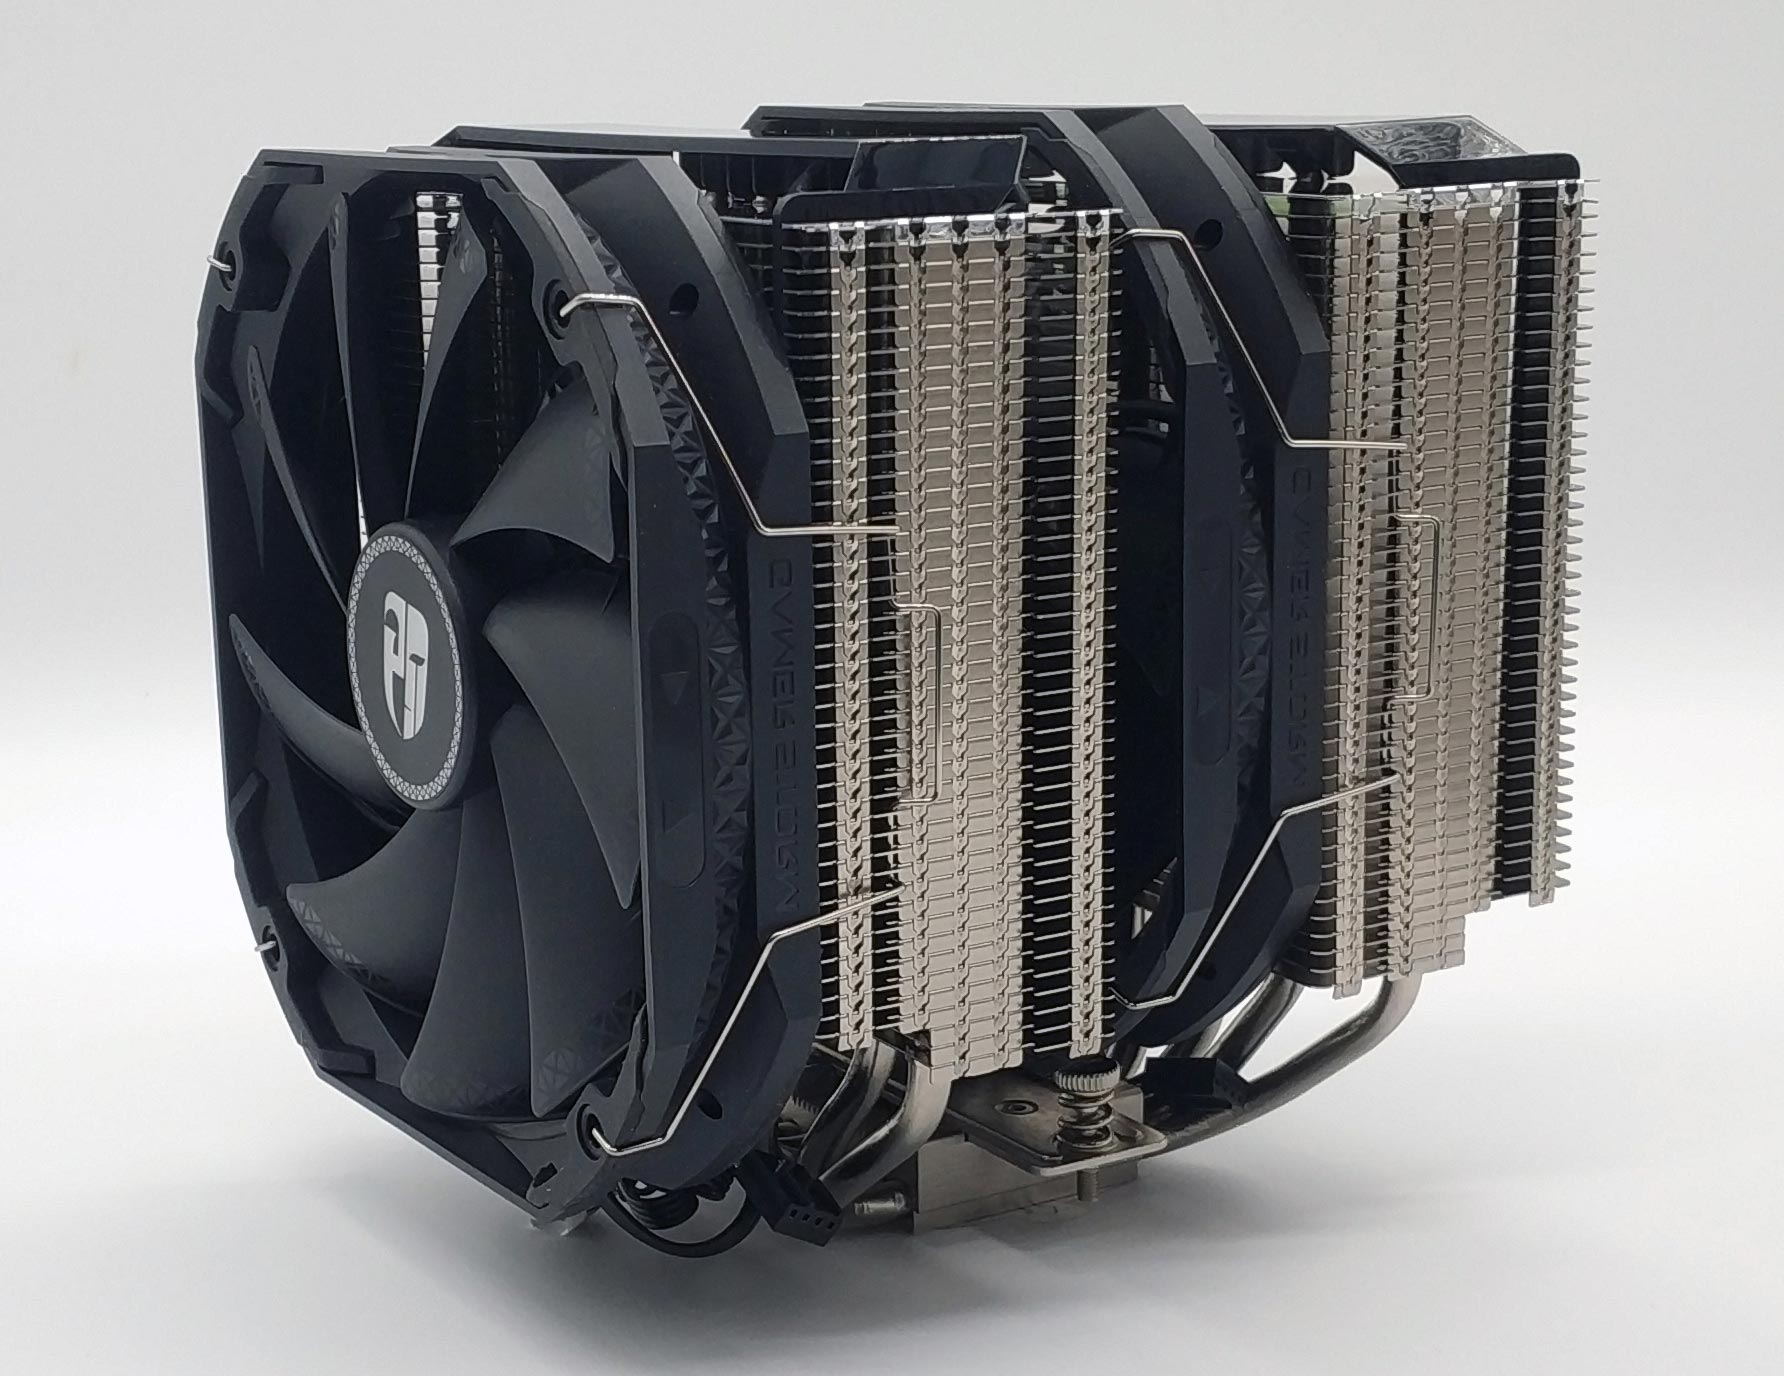 Deepcool Assassin III in the test - cooling power thanks to the double tower